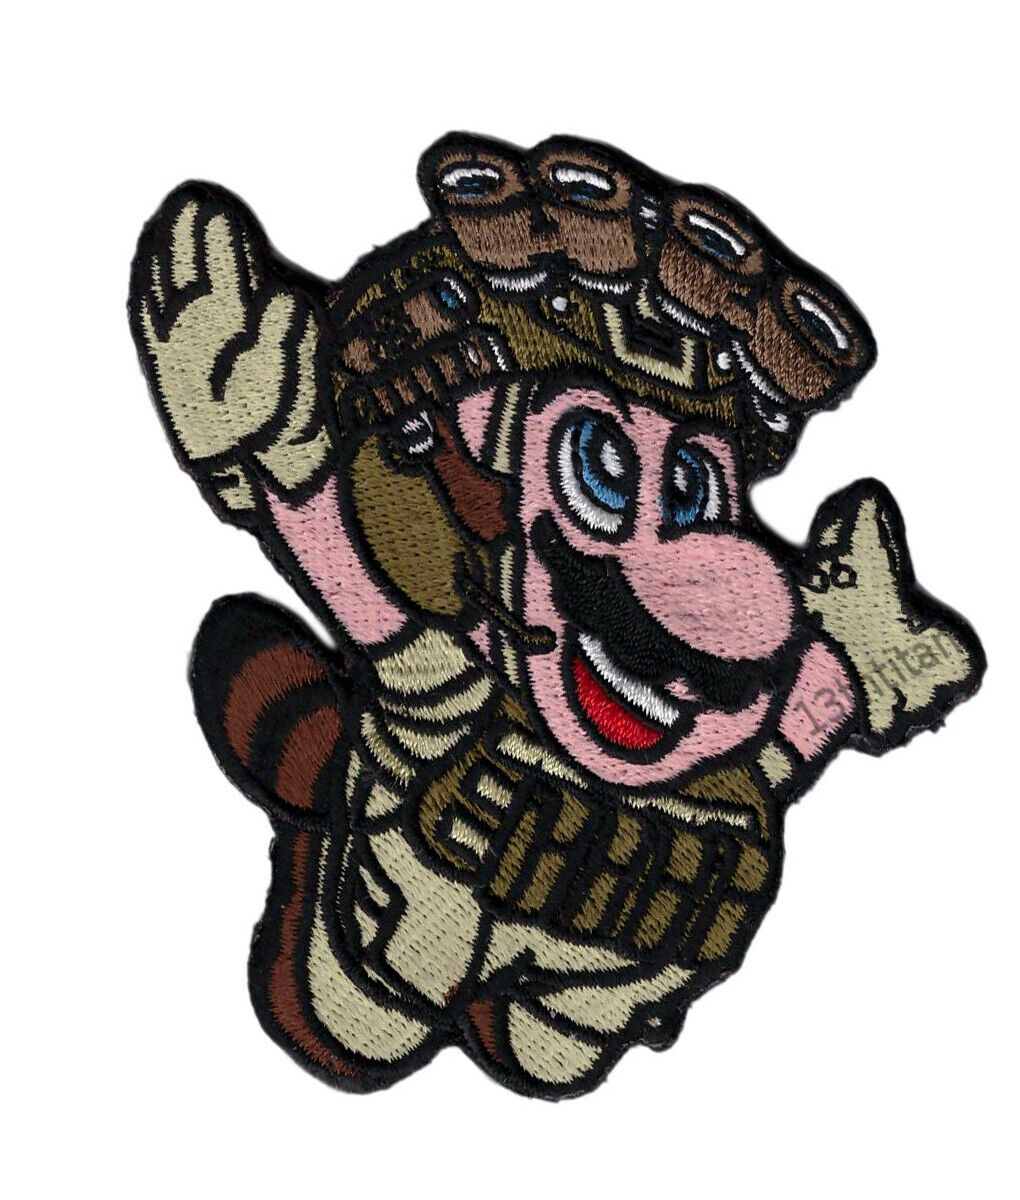 Mario Fly Tanuki Operator Tactical Morale Patch for VELCRO® BRAND Hook Fastener